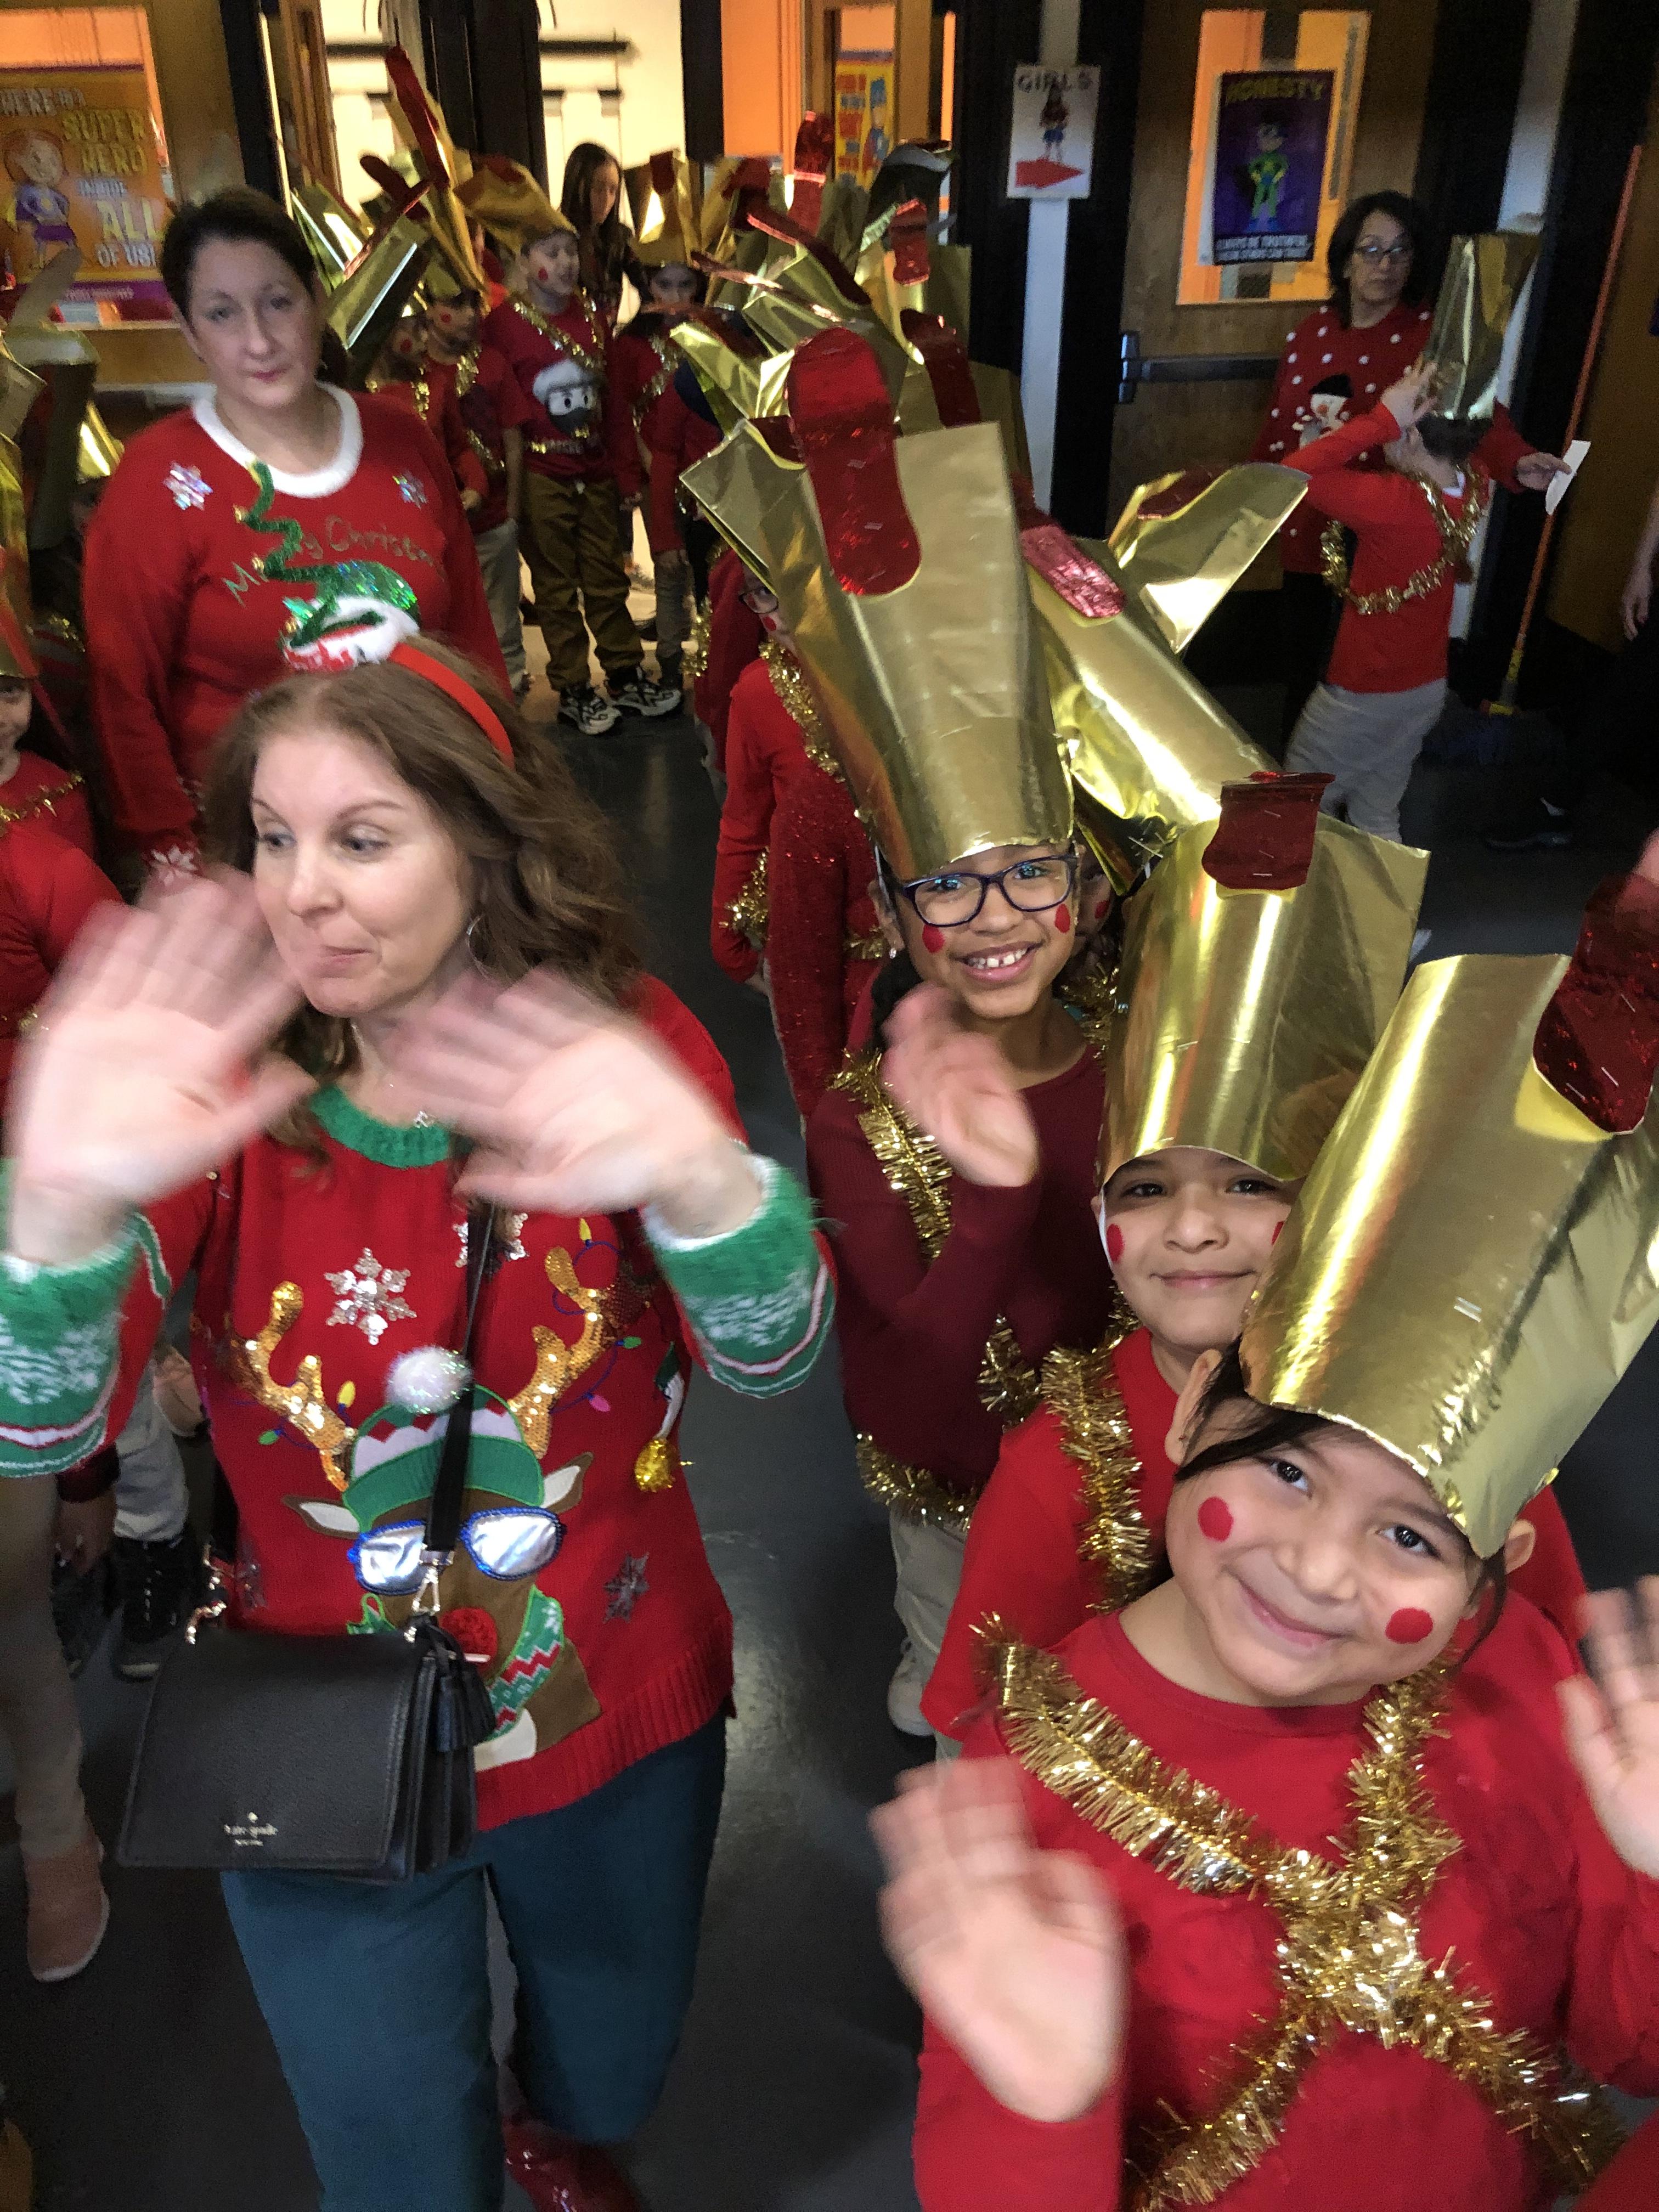 teachers with ugly sweaters and children dressed toy soldiers ready to perform